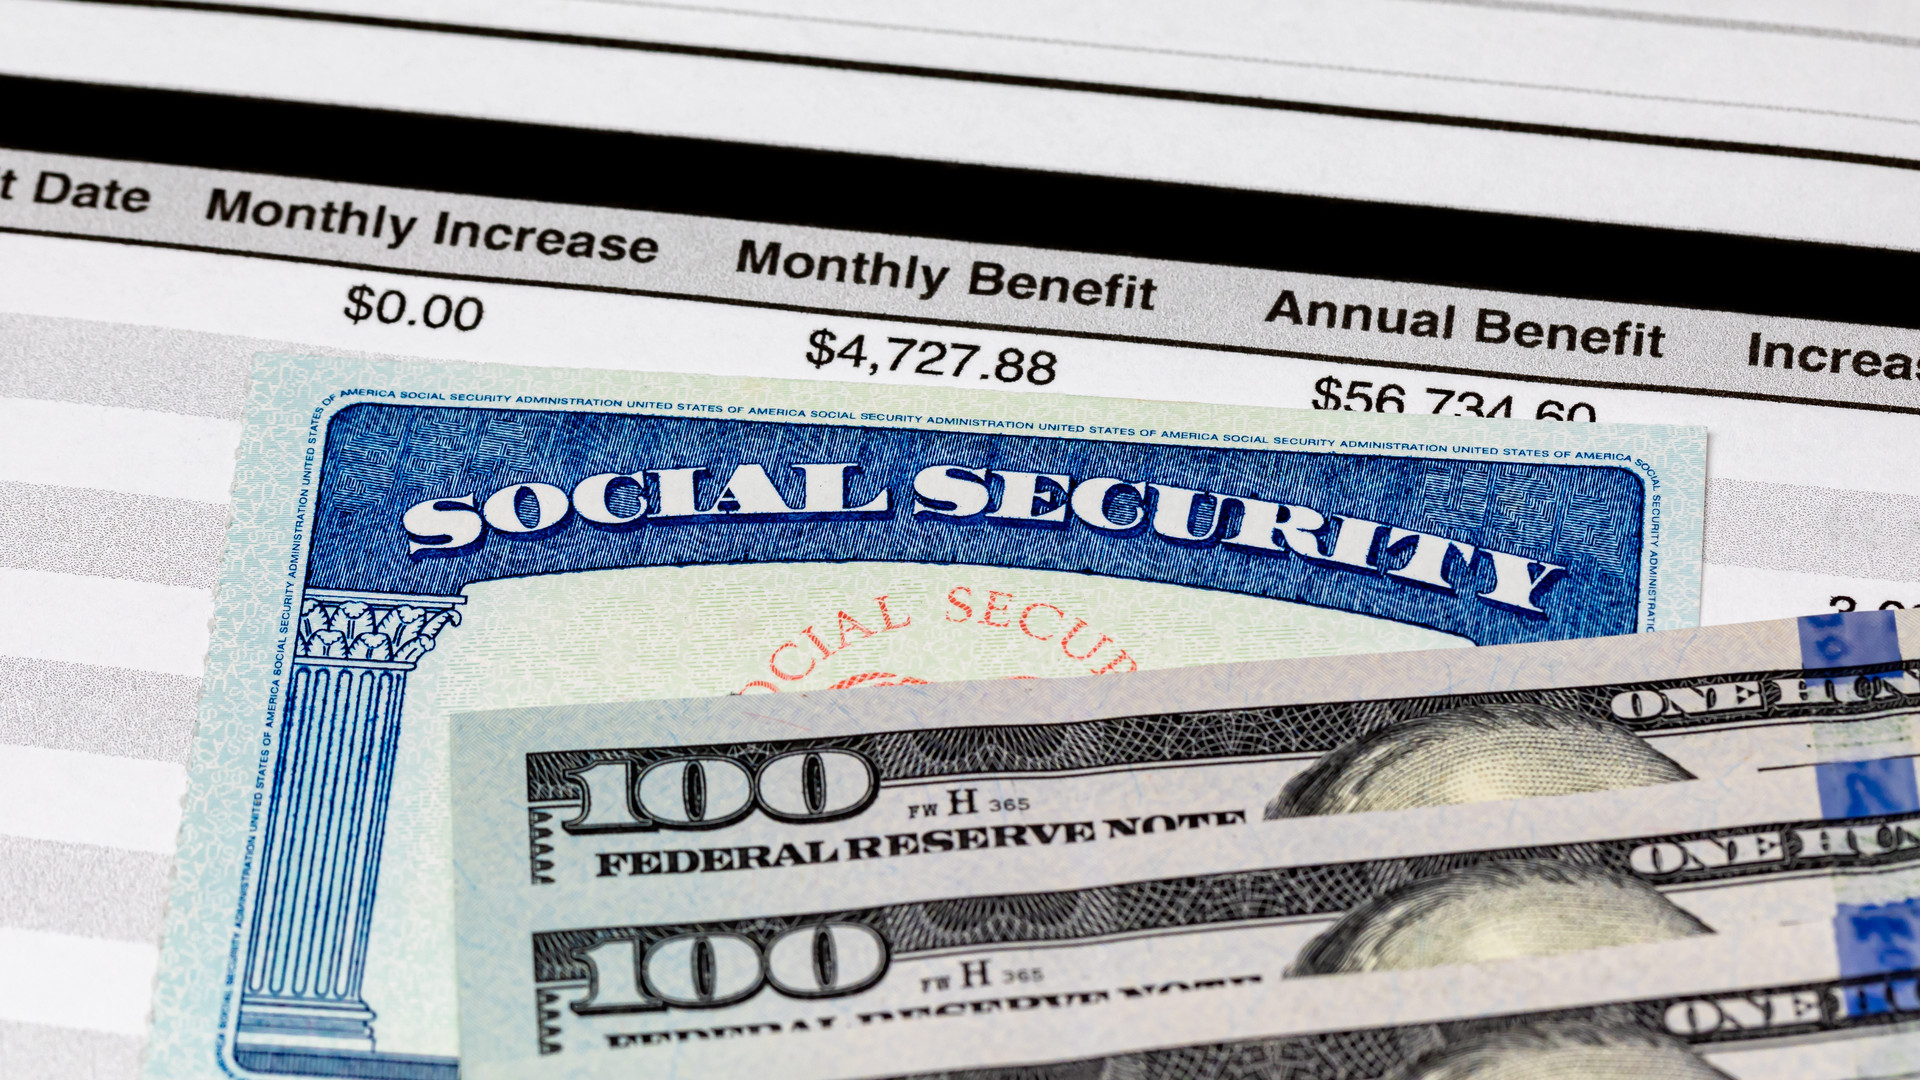 Social Security Card, benefits statement and 100 dollar bills. Social security funding, payment, retirement and federal government benefits concept